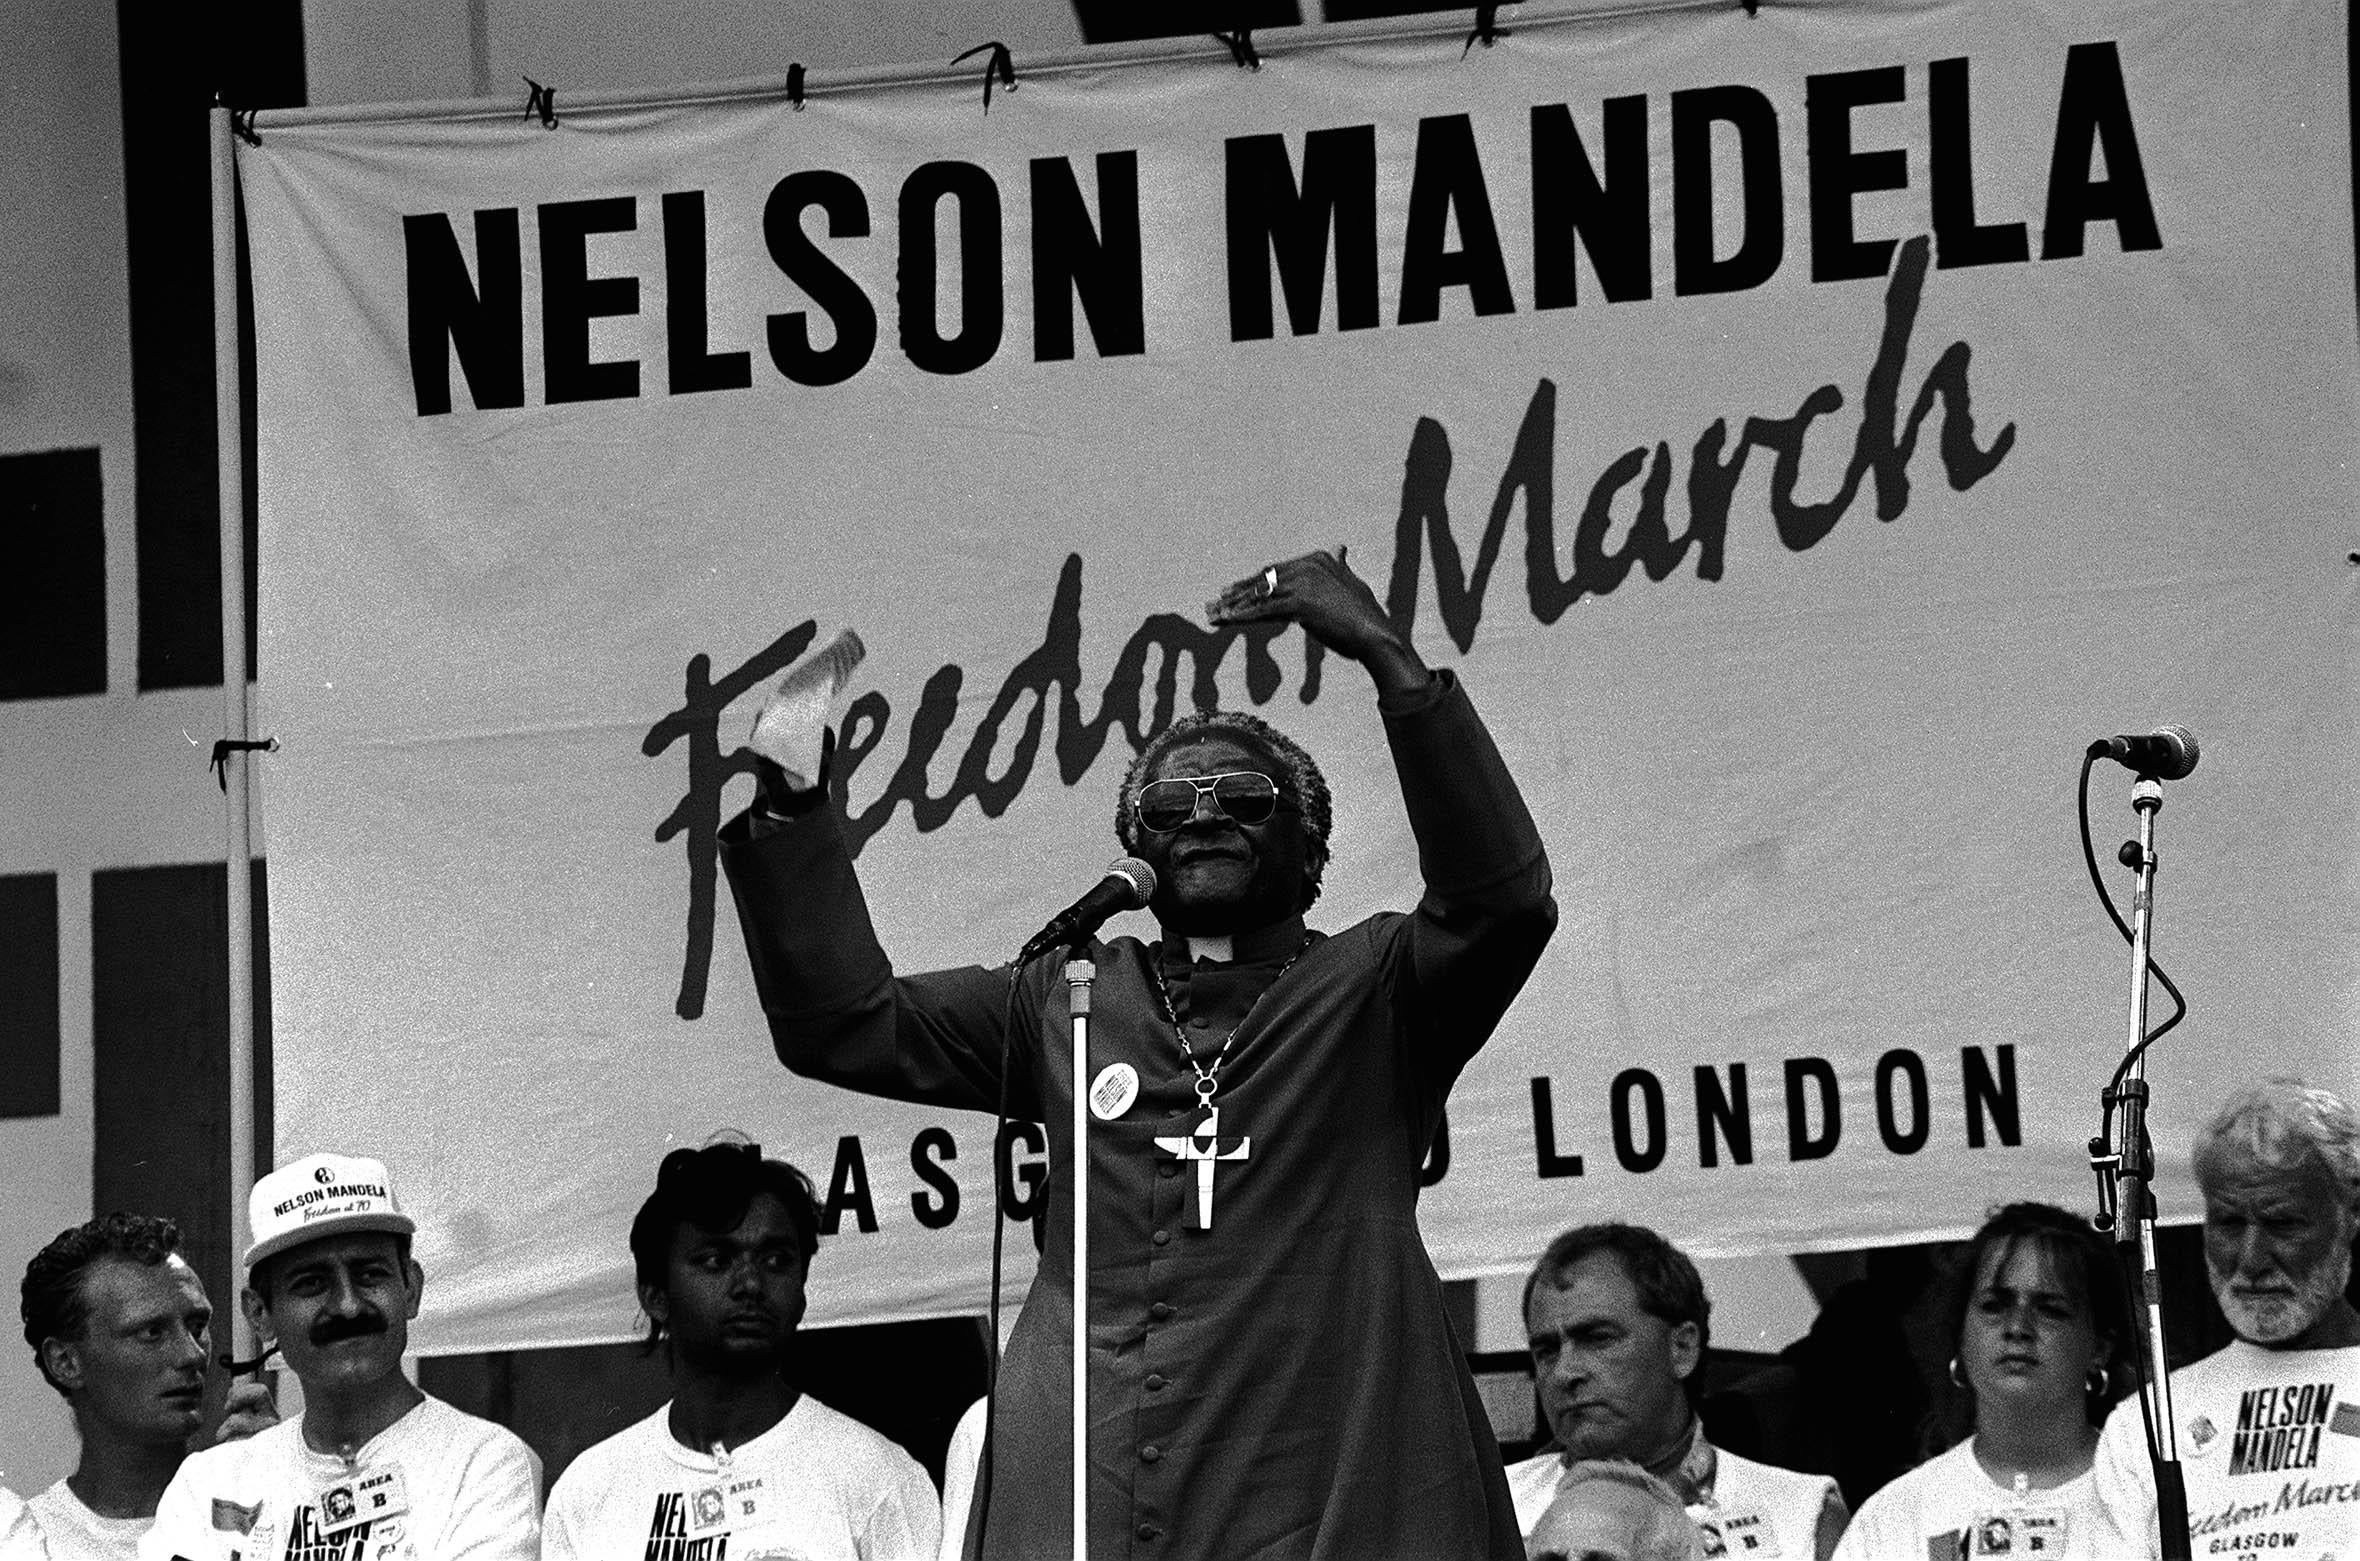 Tutu addressing the Nelson Mandela Freedom Rally in Hyde Park, London, in 1988 (PA)